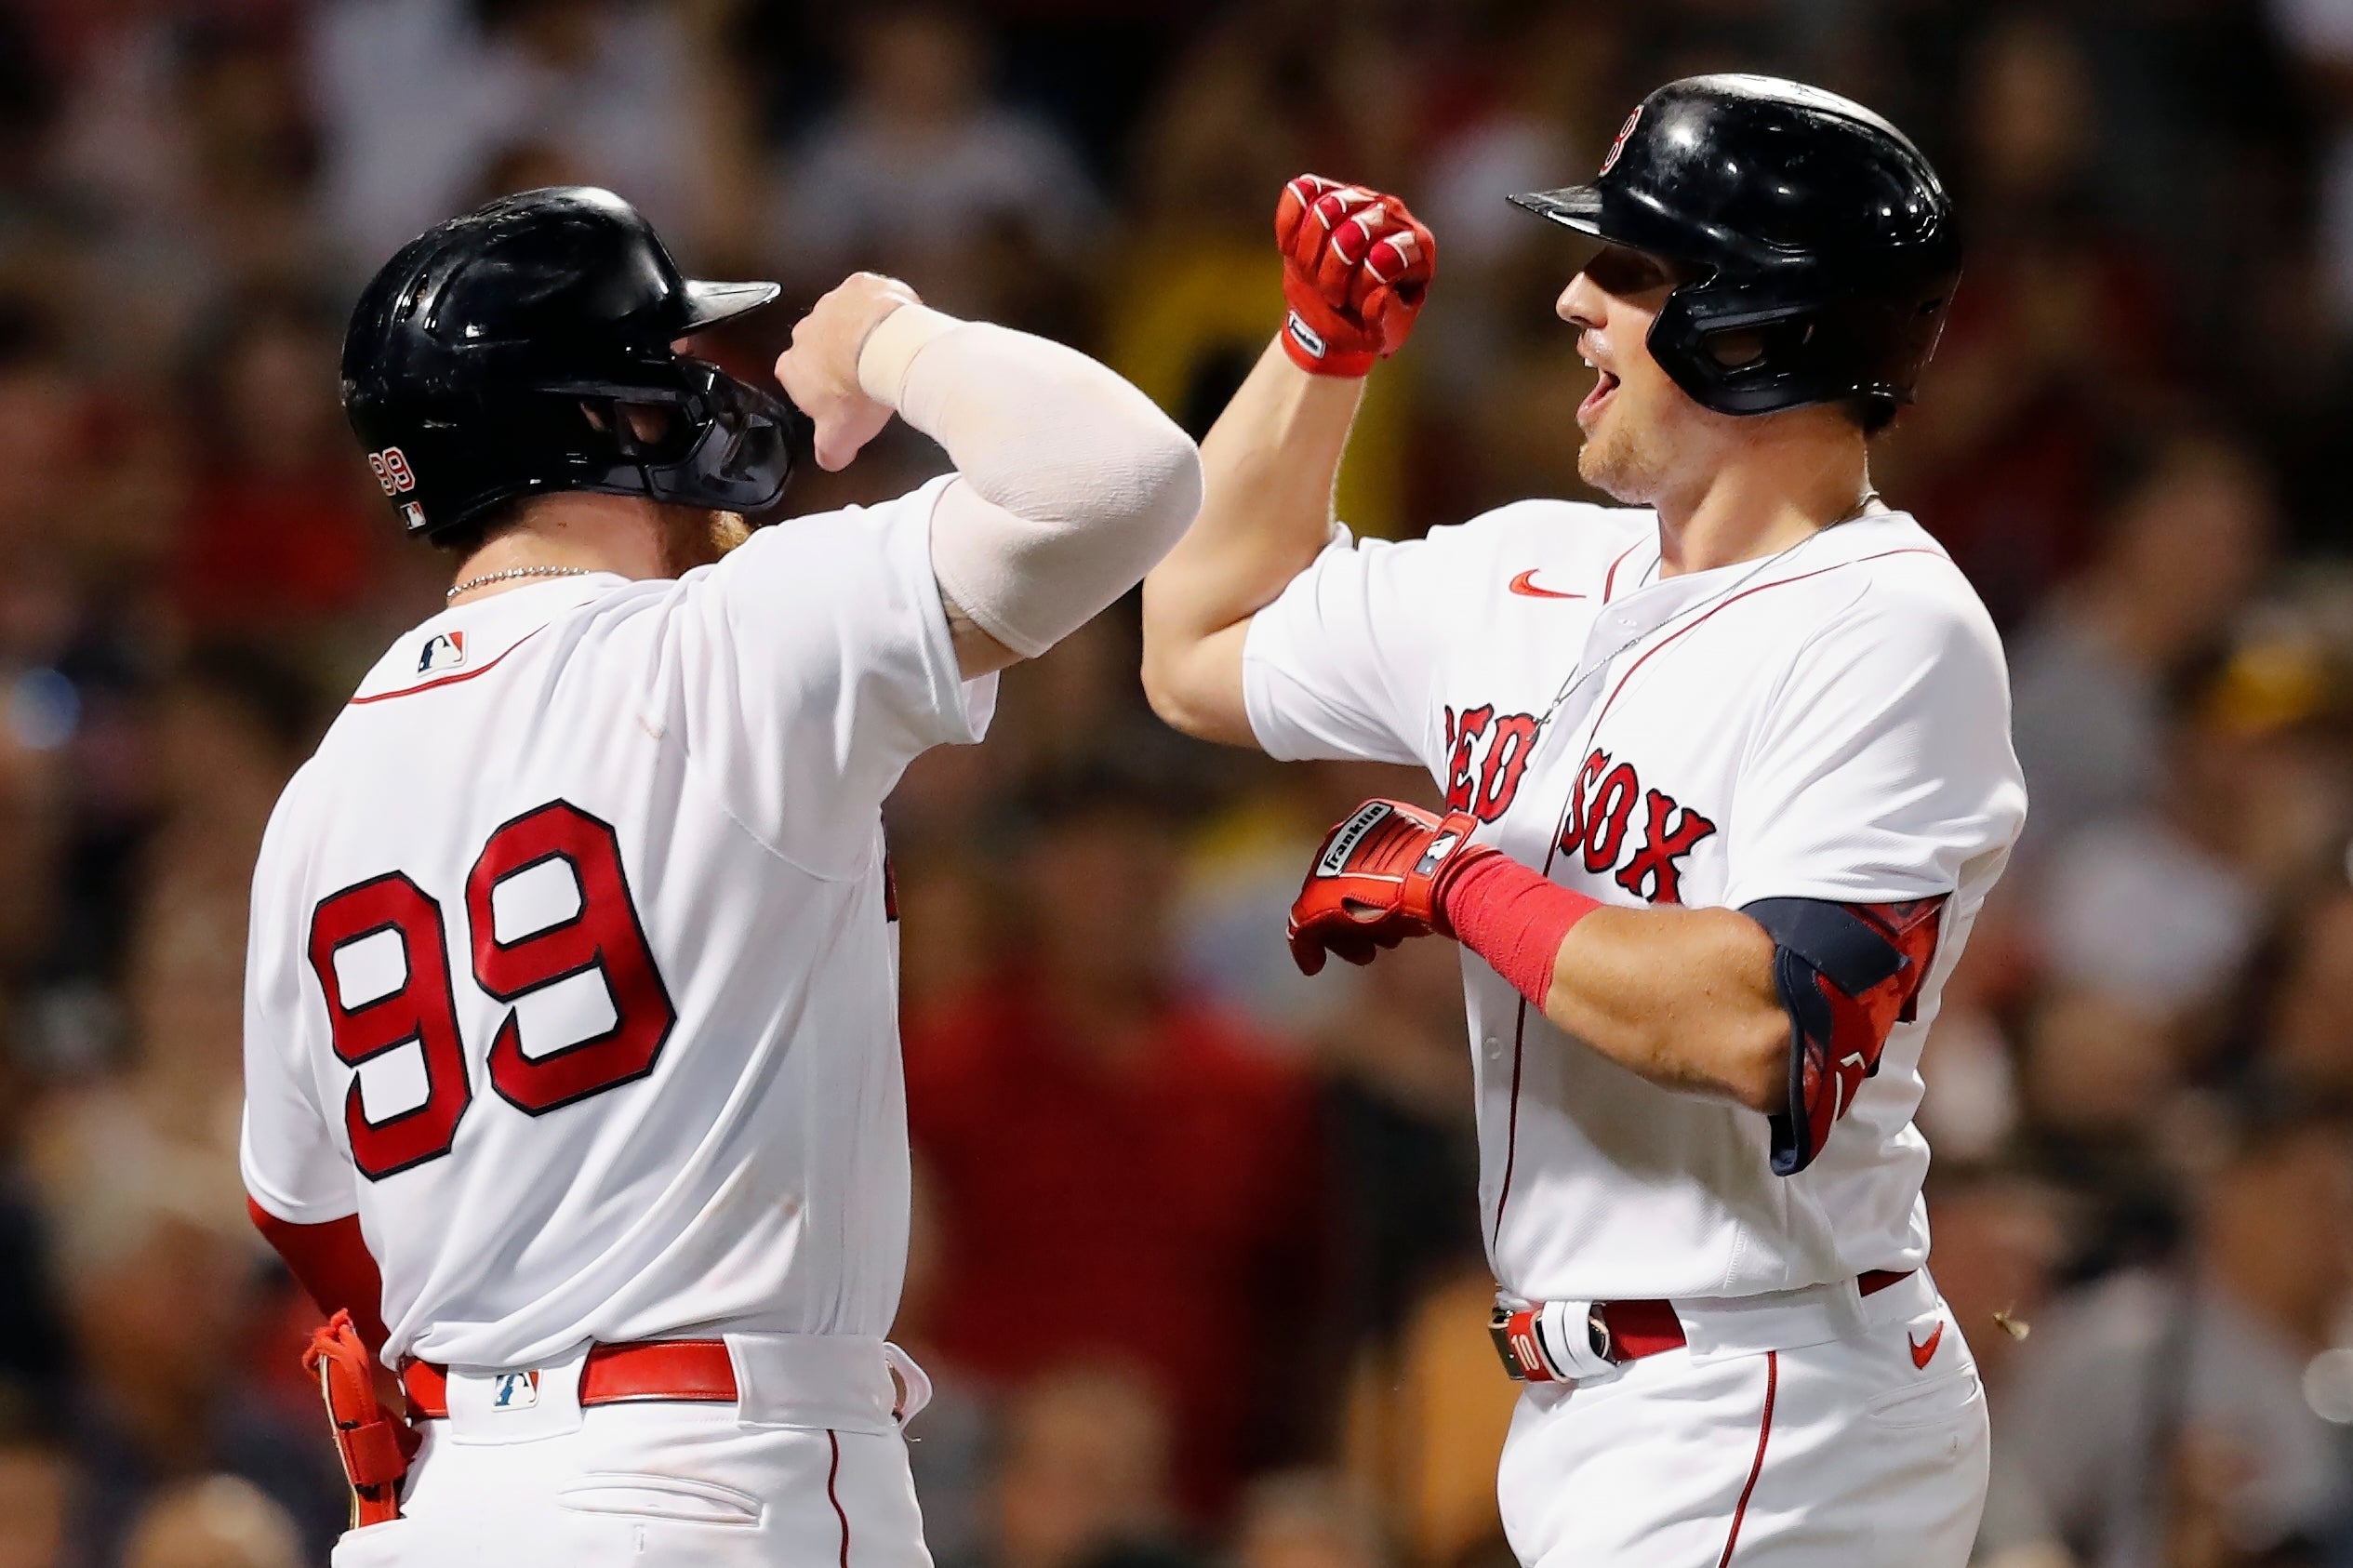 Alex Verdugo drives in 2 runs in the Red Sox's 4-3 victory over